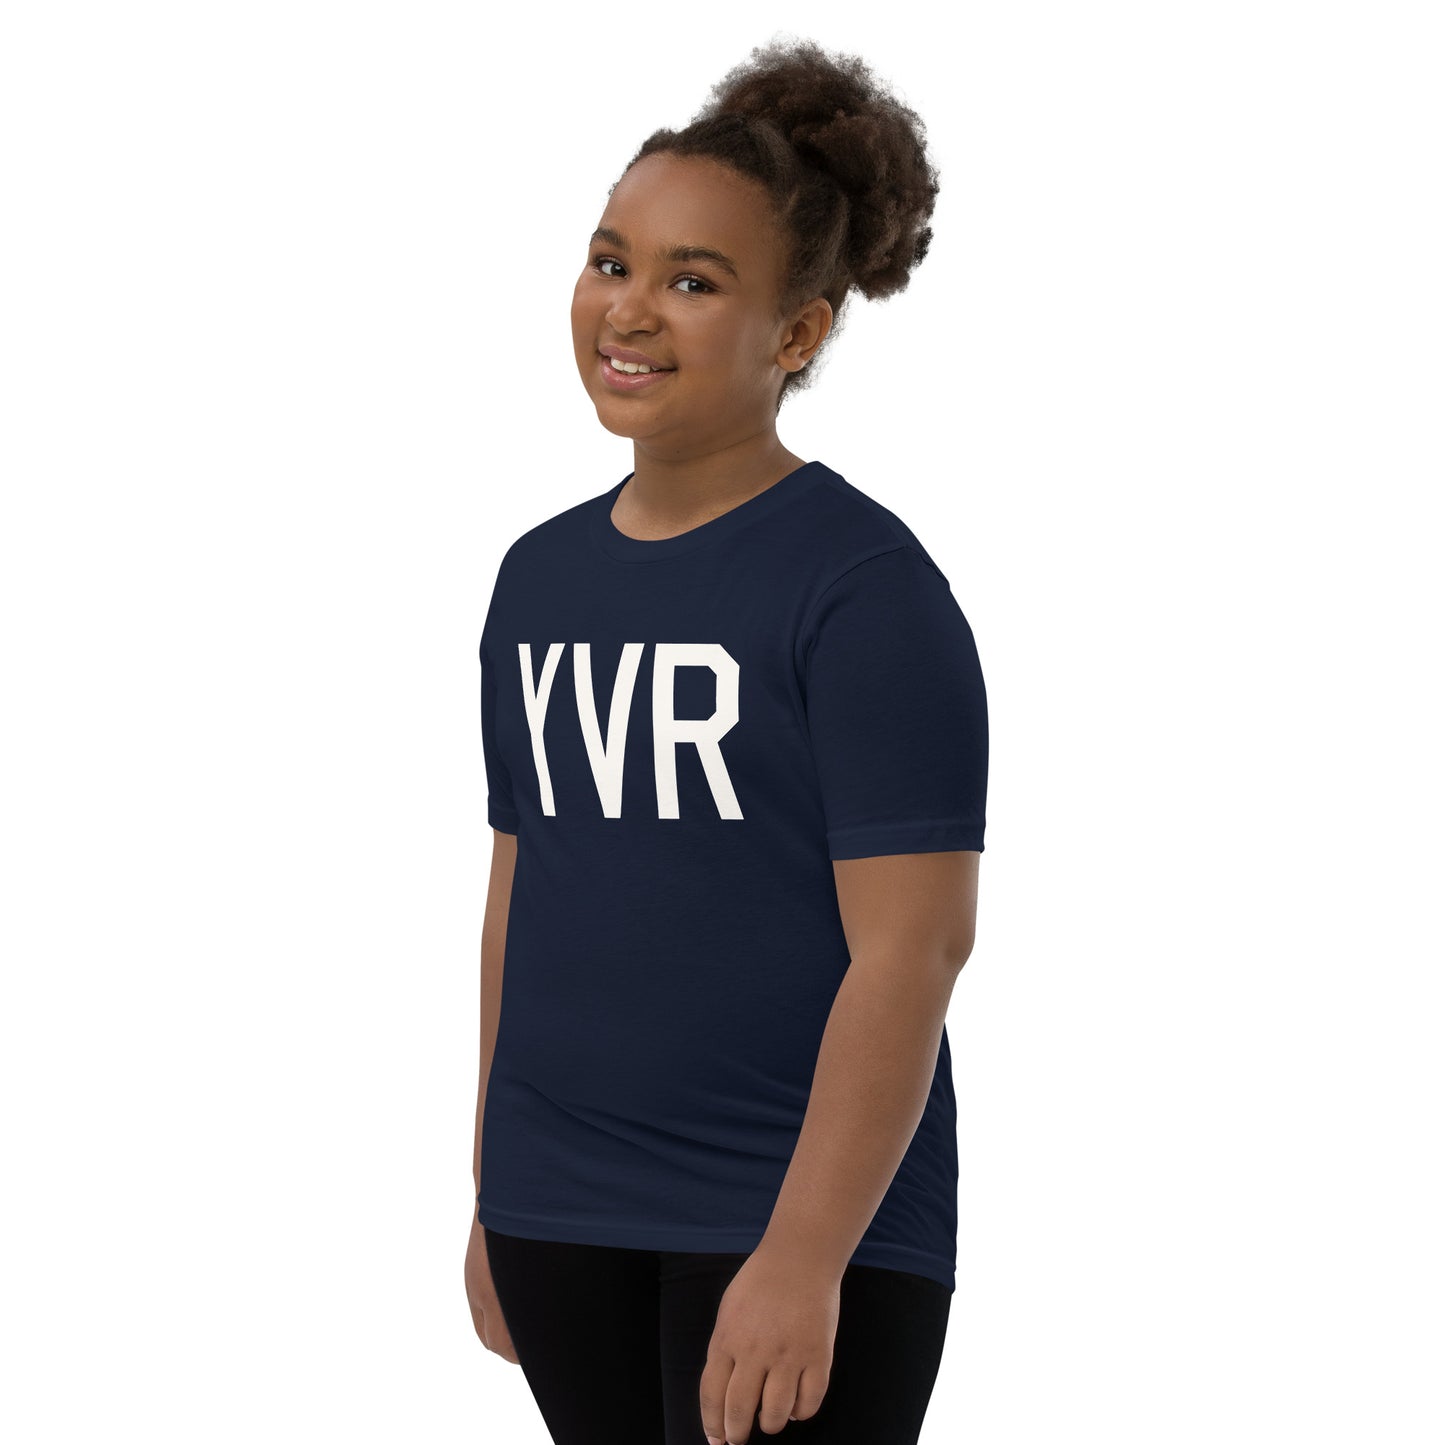 Kid's T-Shirt - White Graphic • YVR Vancouver • YHM Designs - Image 02